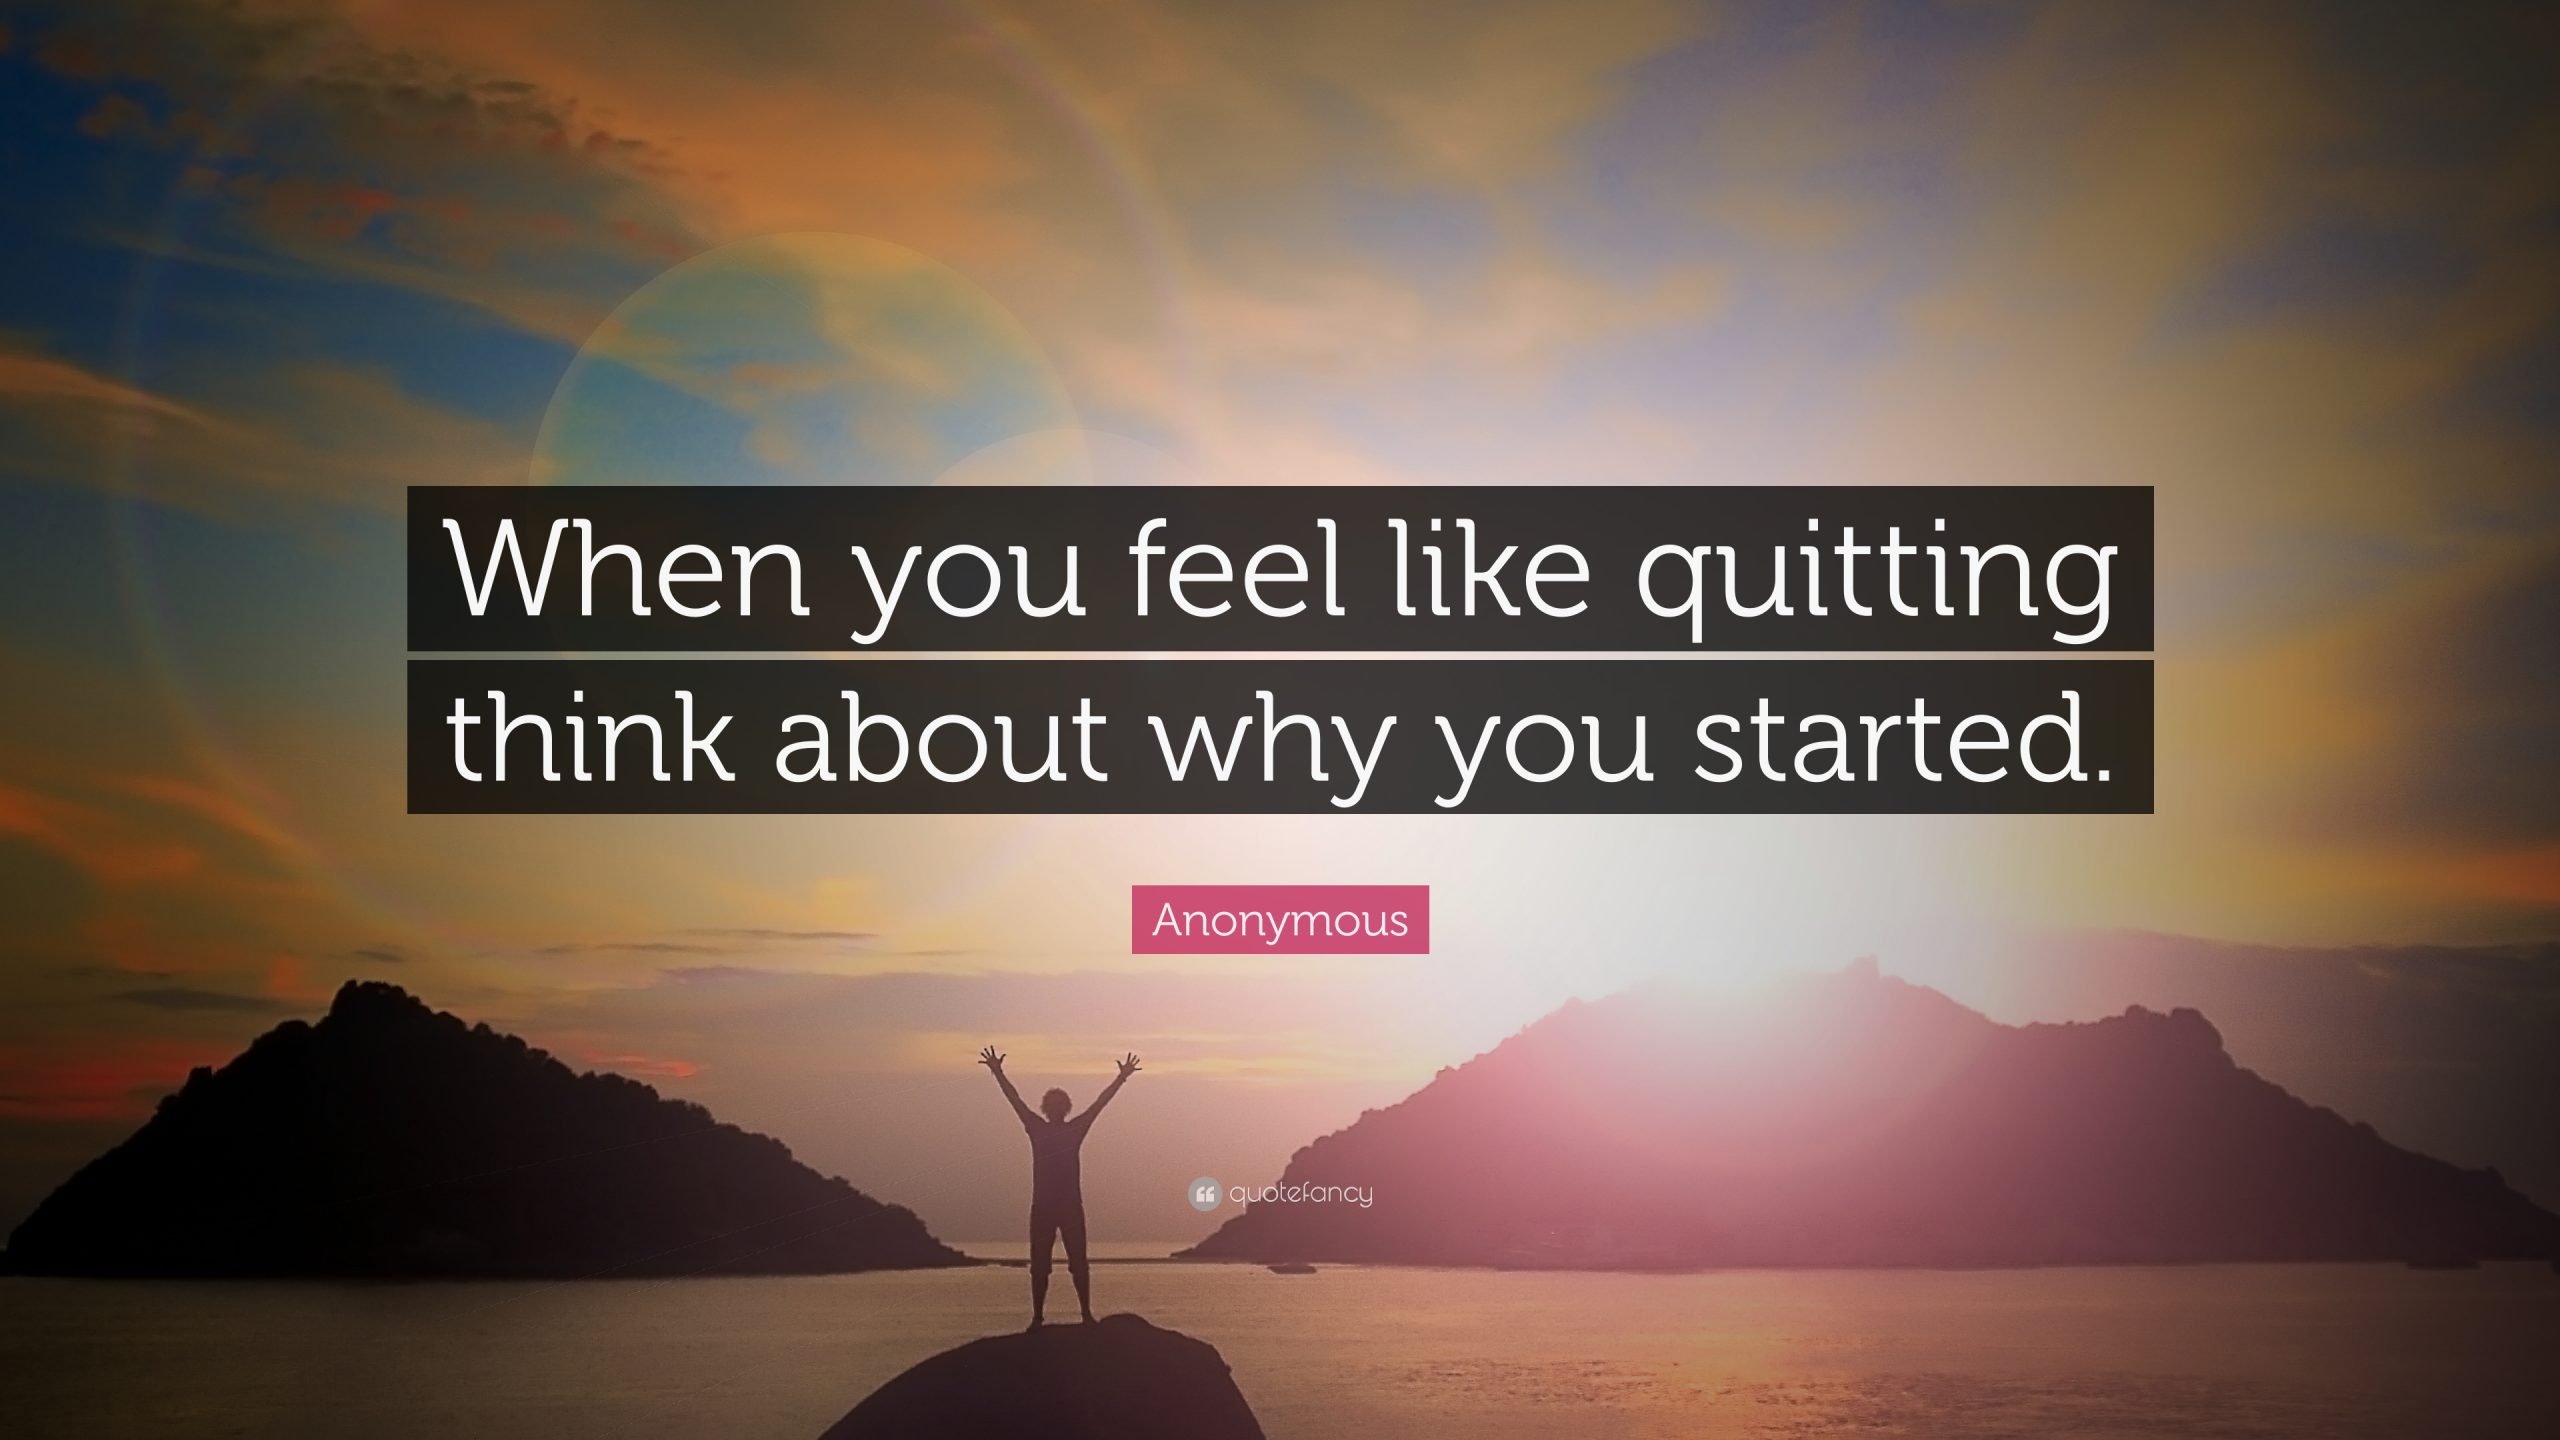 "When you feel like quitting, think about why you started."